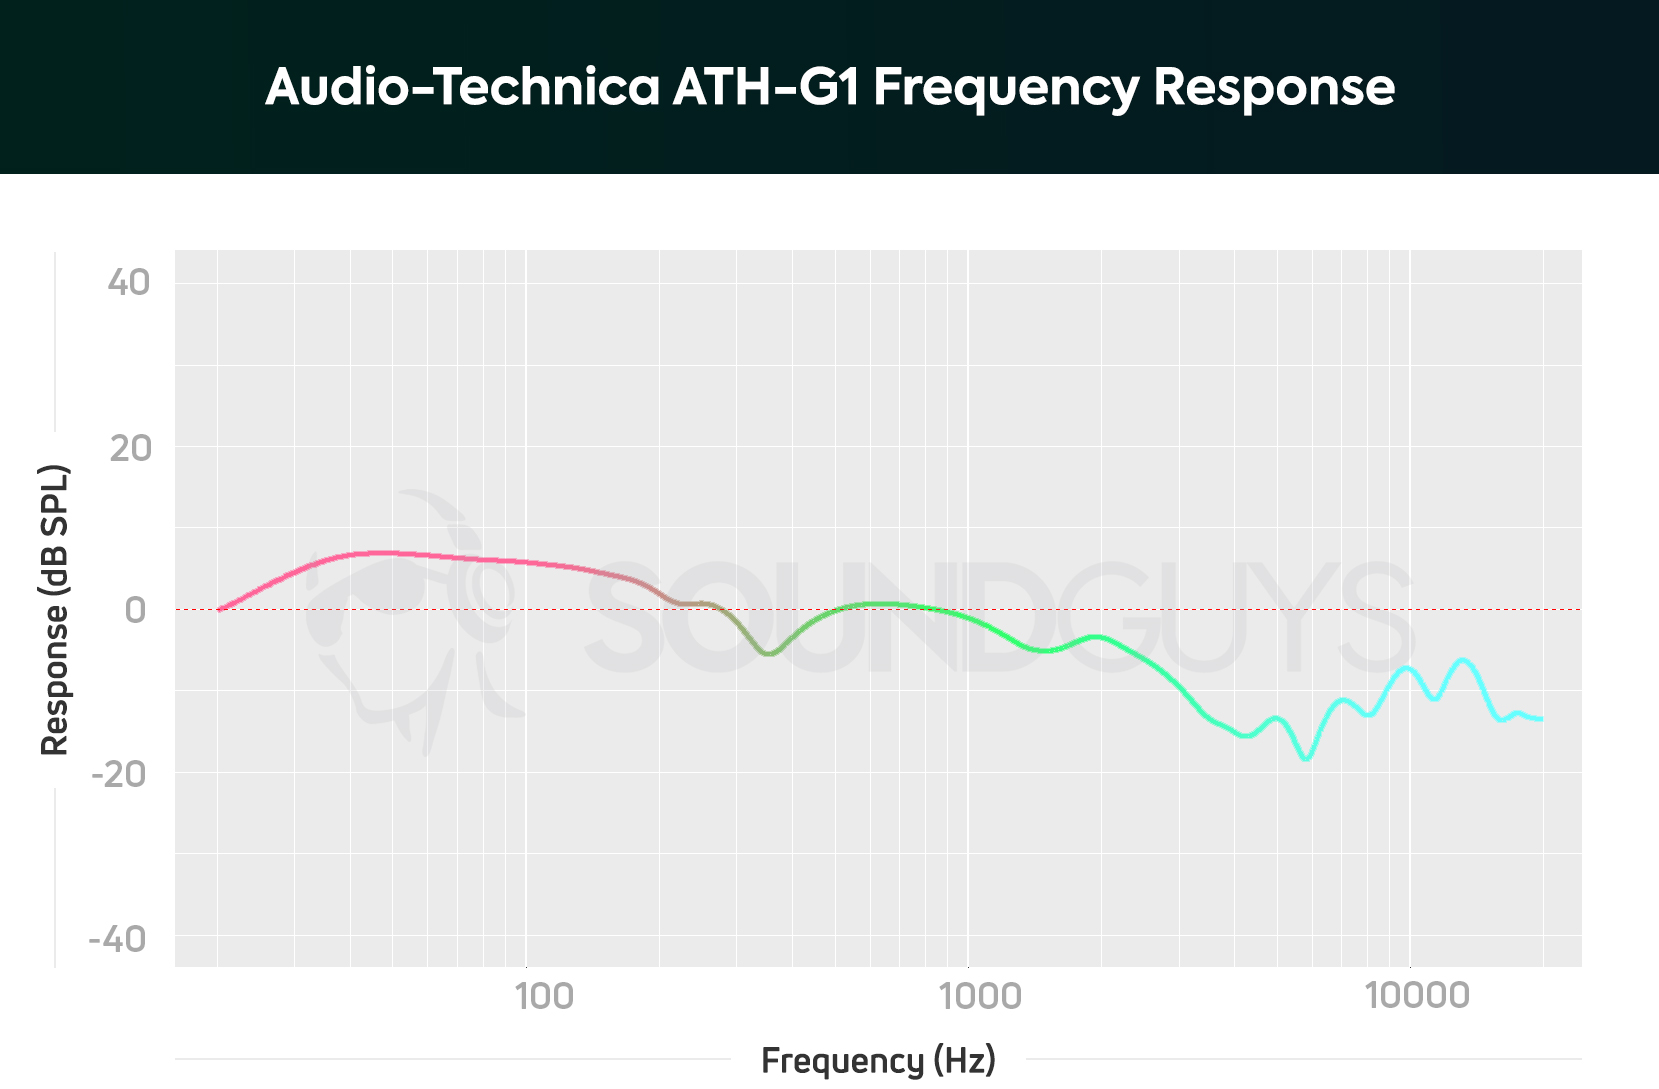 The Audio-Technica ATH-G1 gaming headphones frequency response.